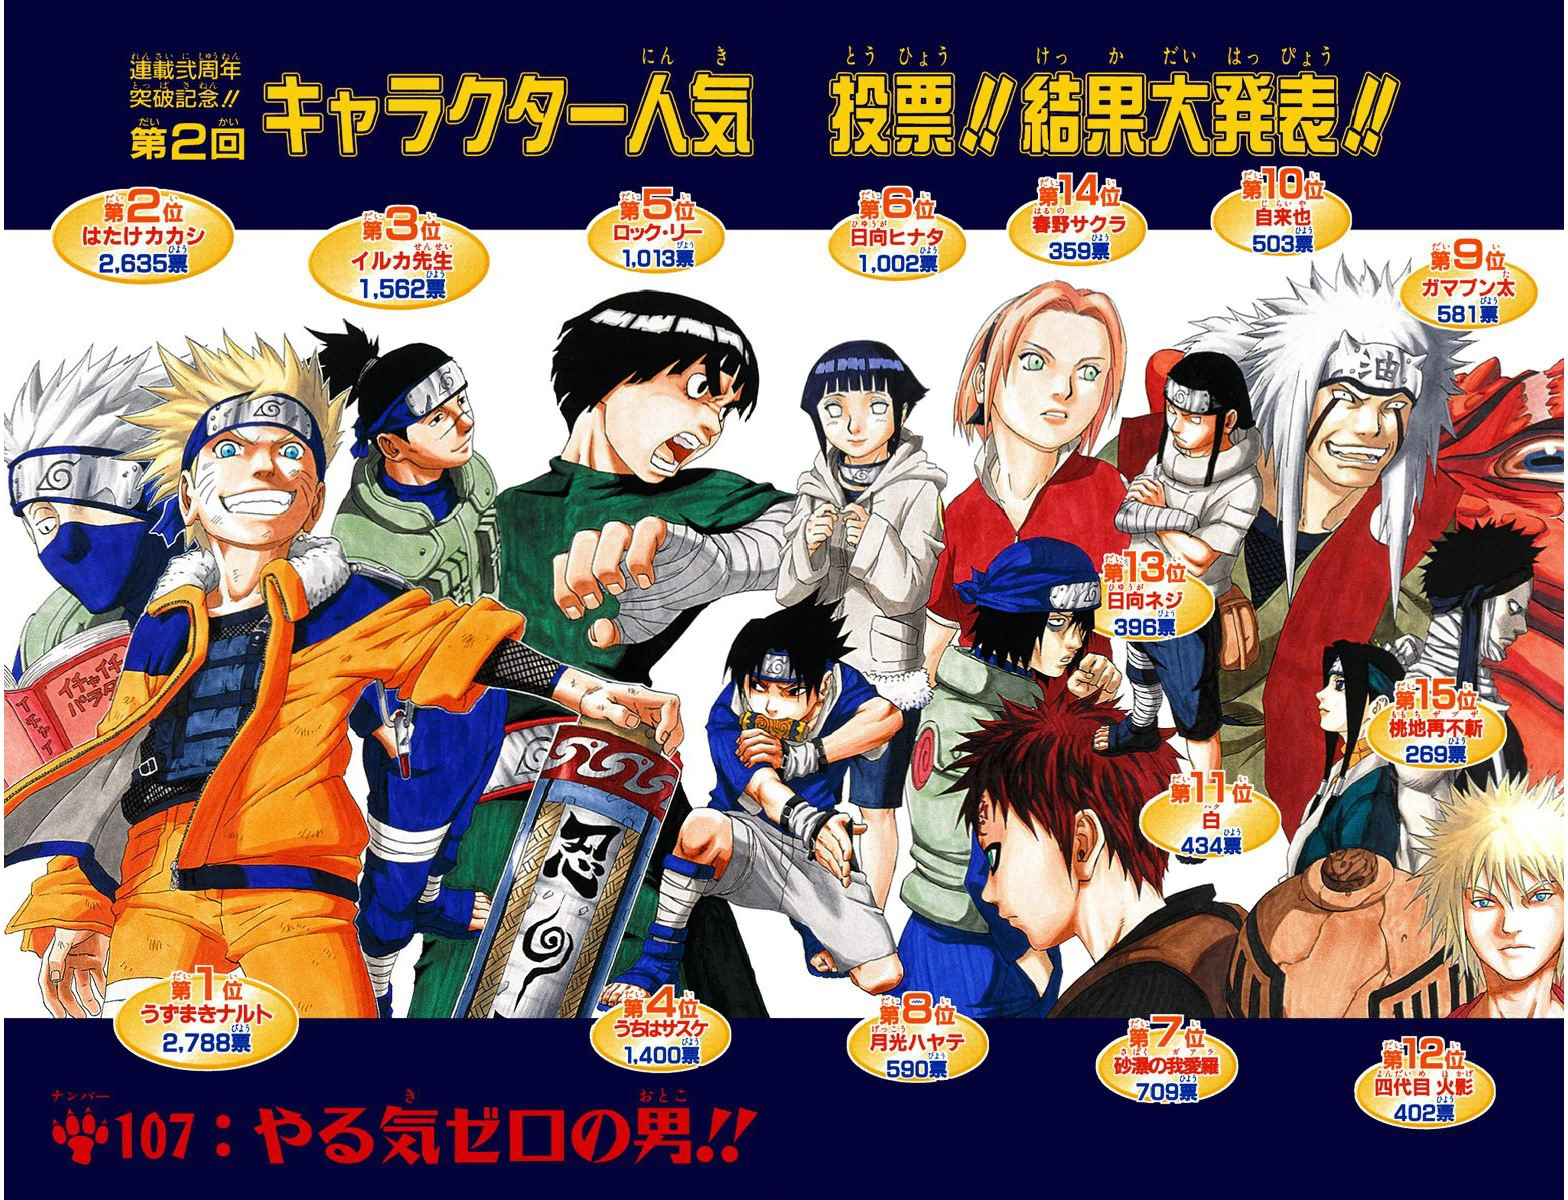 Naruto: Most Popular Characters, According To Worldwide Poll